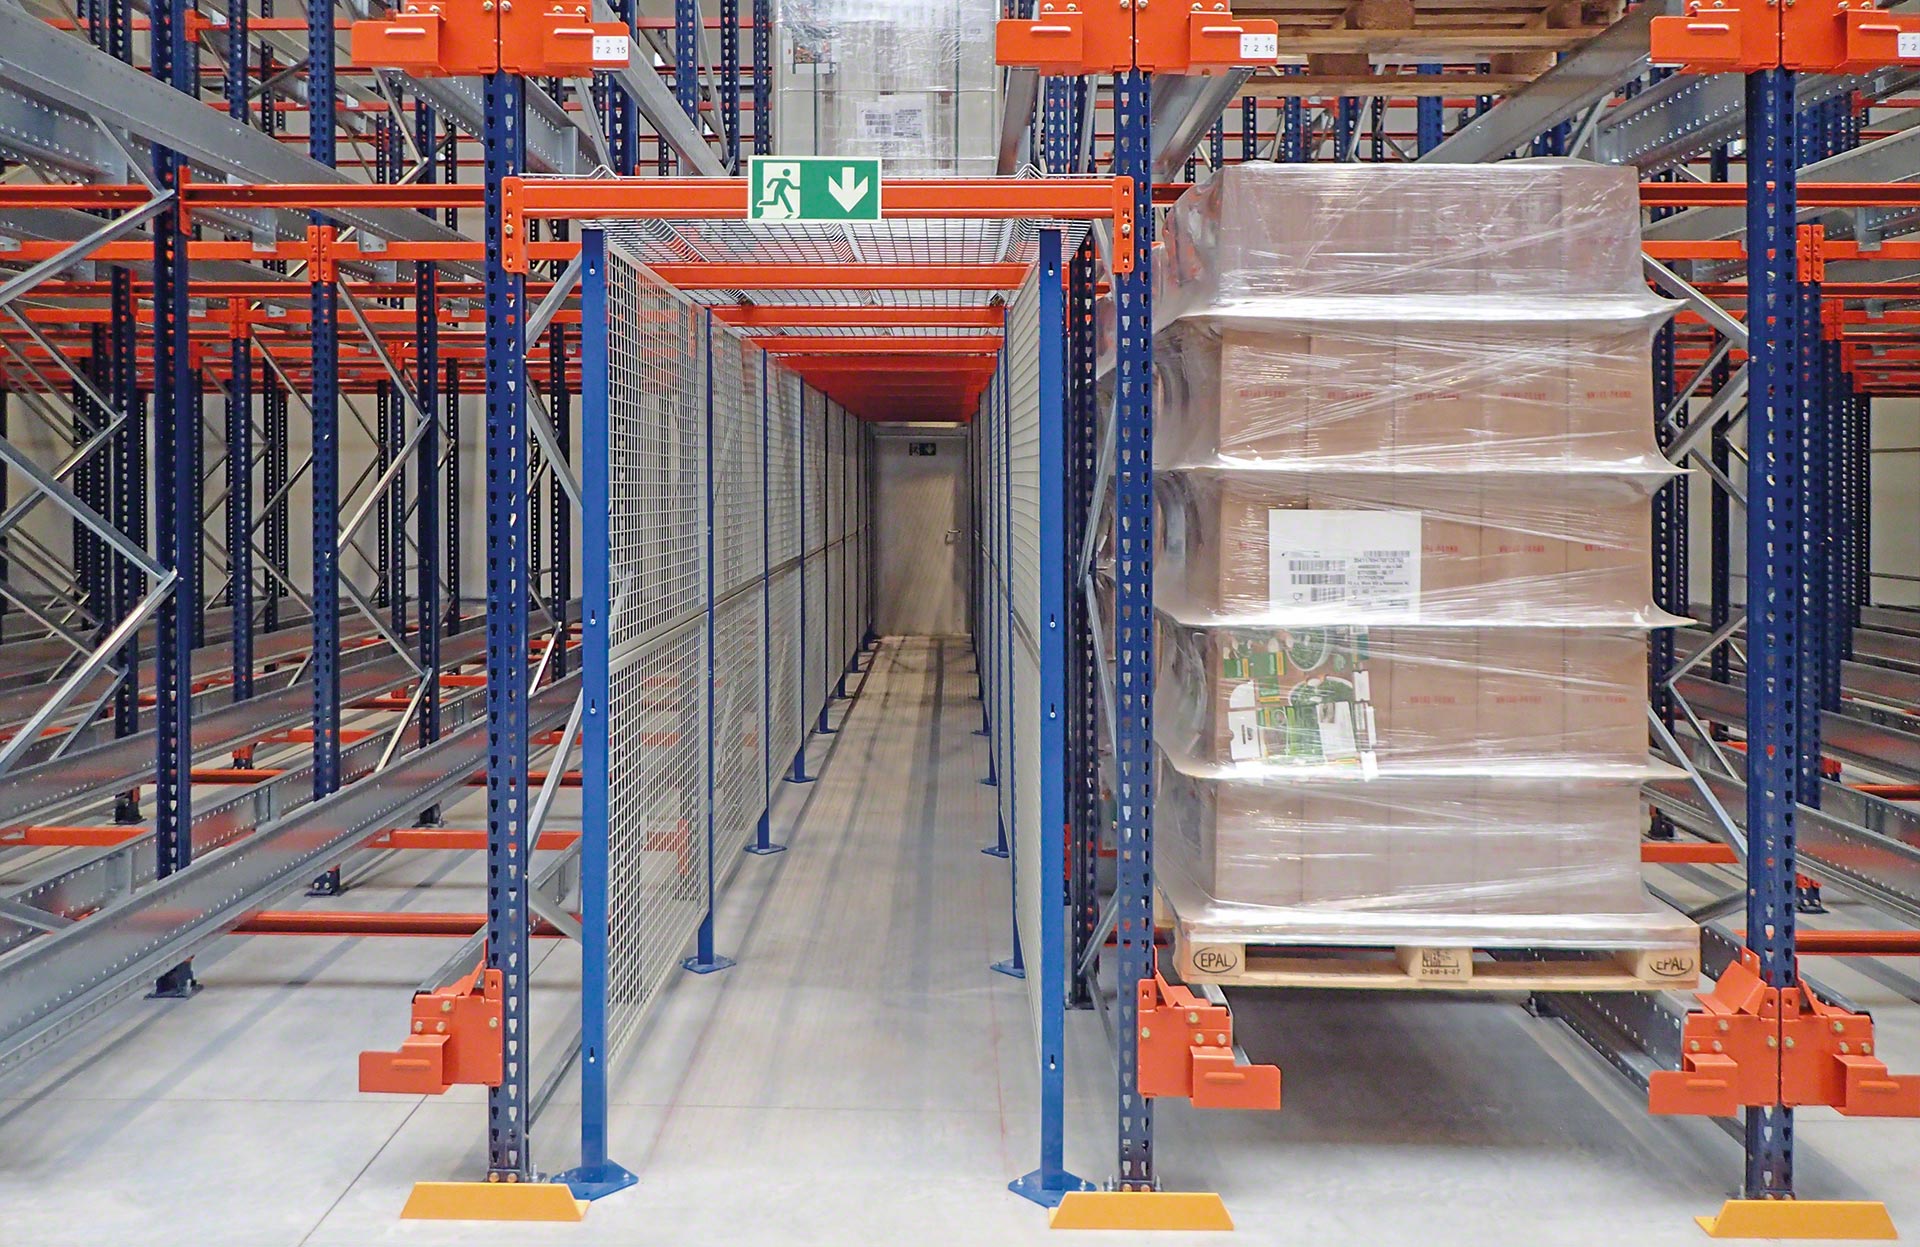 It is possible to install evacuation/maintenance passageways that run through the Pallet Shuttle racking